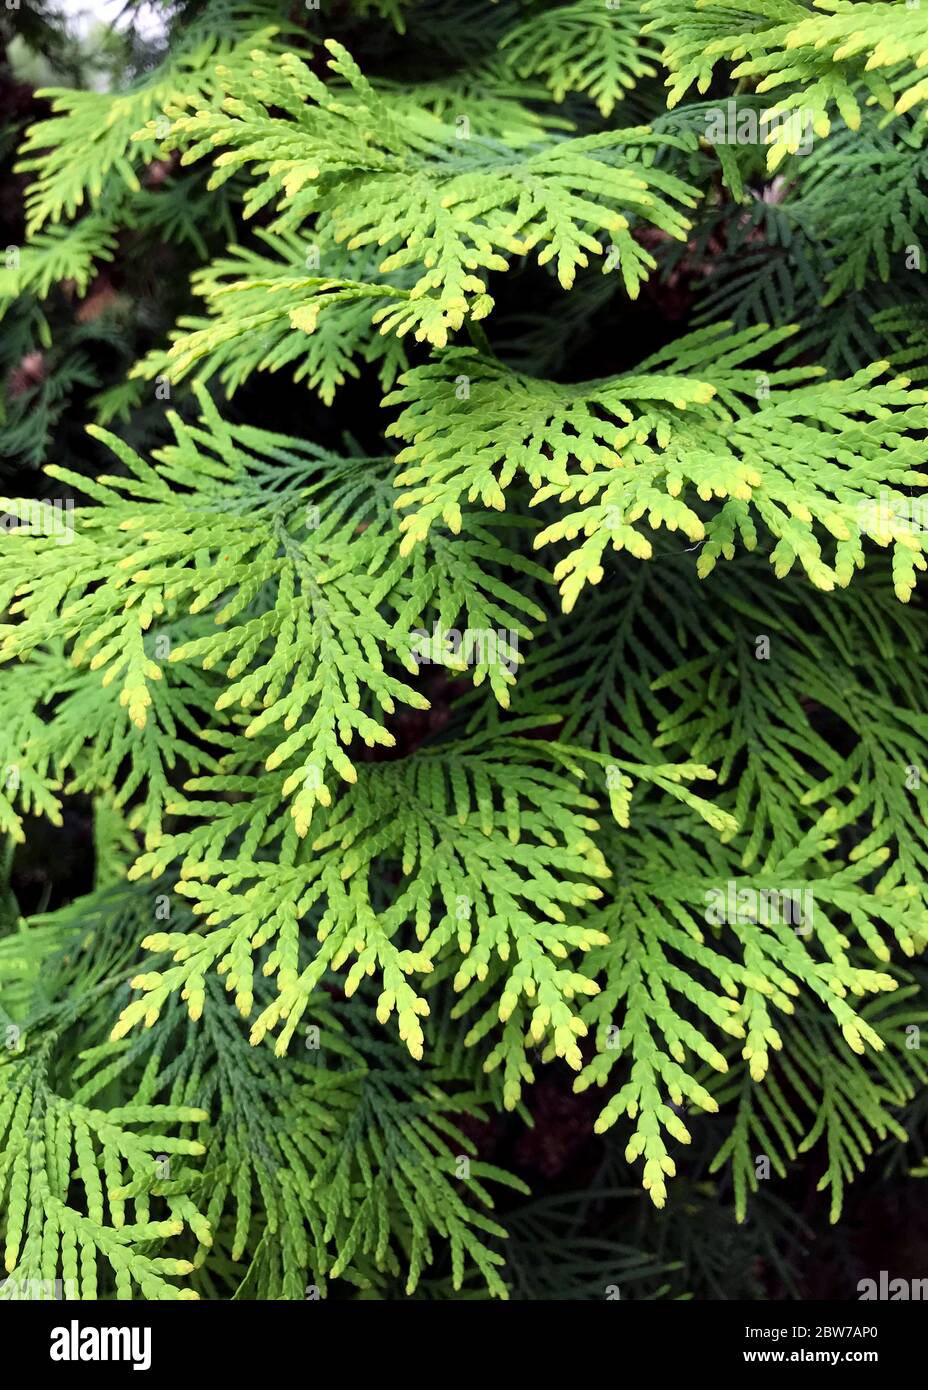 Closeup of Beautiful green leaves of Thuja trees. Thuja occidentalis is an evergreen coniferous tree. Platycladus orientalis, also known as Chinese th Stock Photo